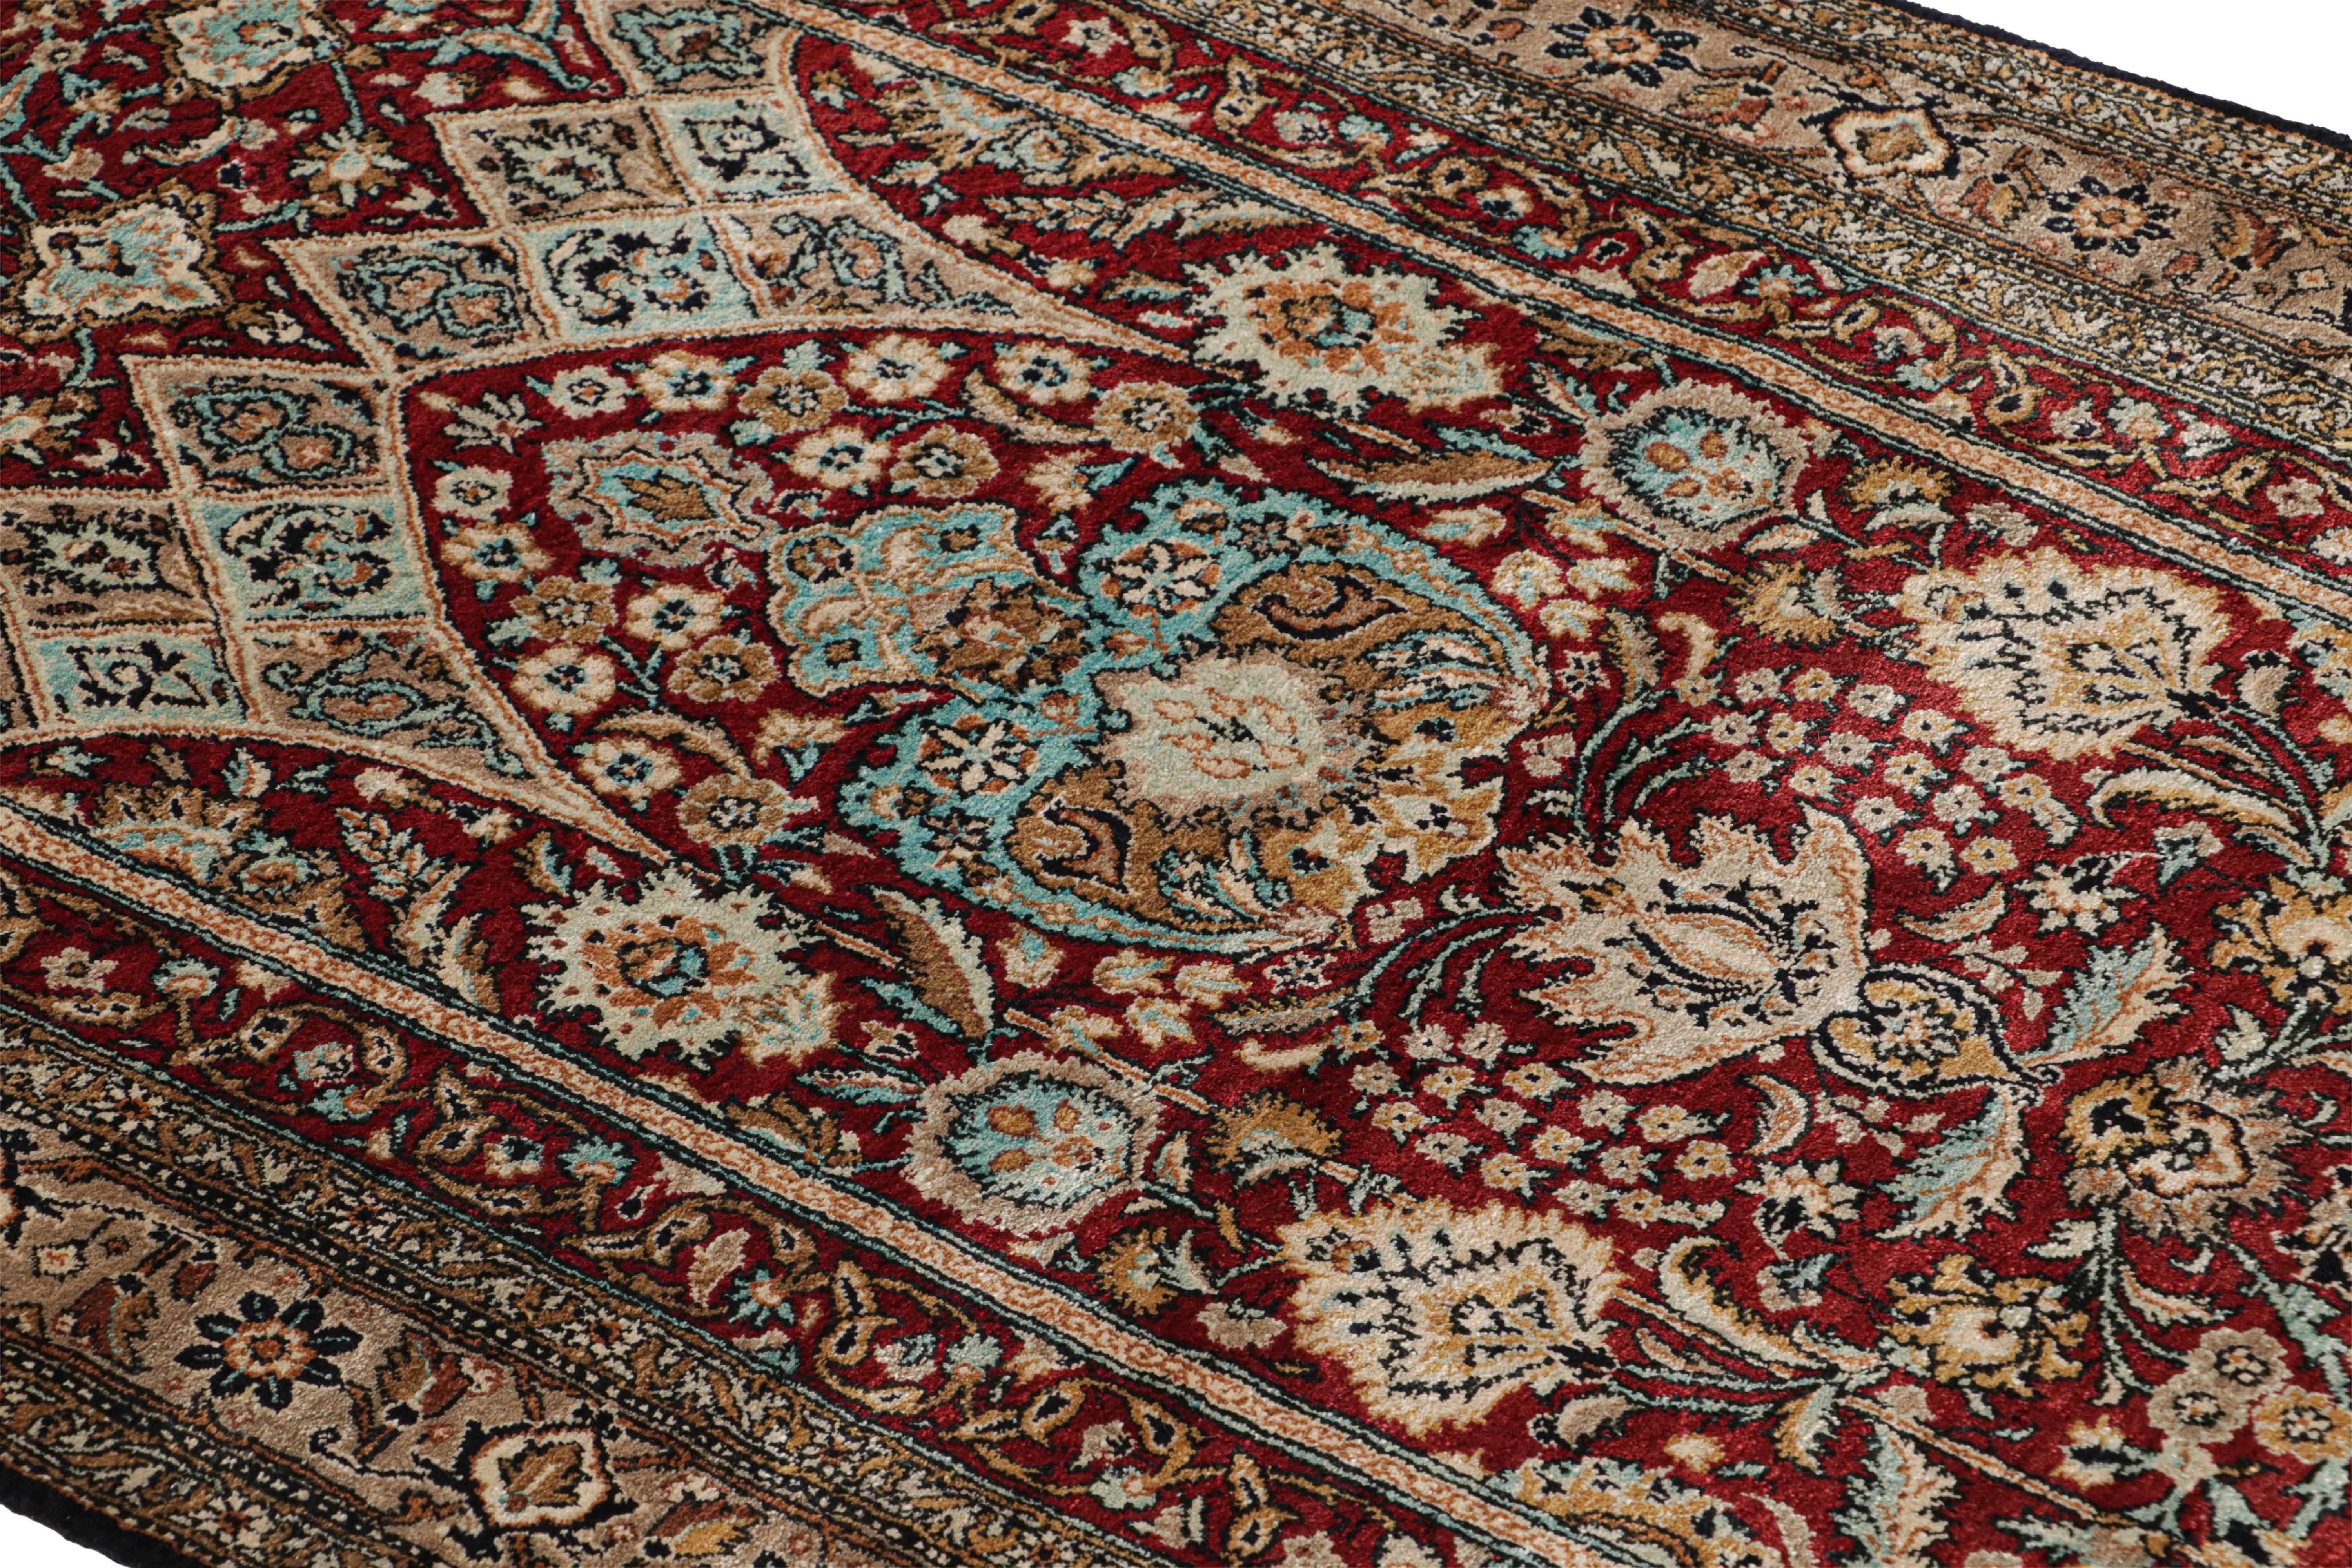 Contemporary Antique Persian Qum Rug in Burgundy With Floral Patterns, From Rug & Kilim For Sale